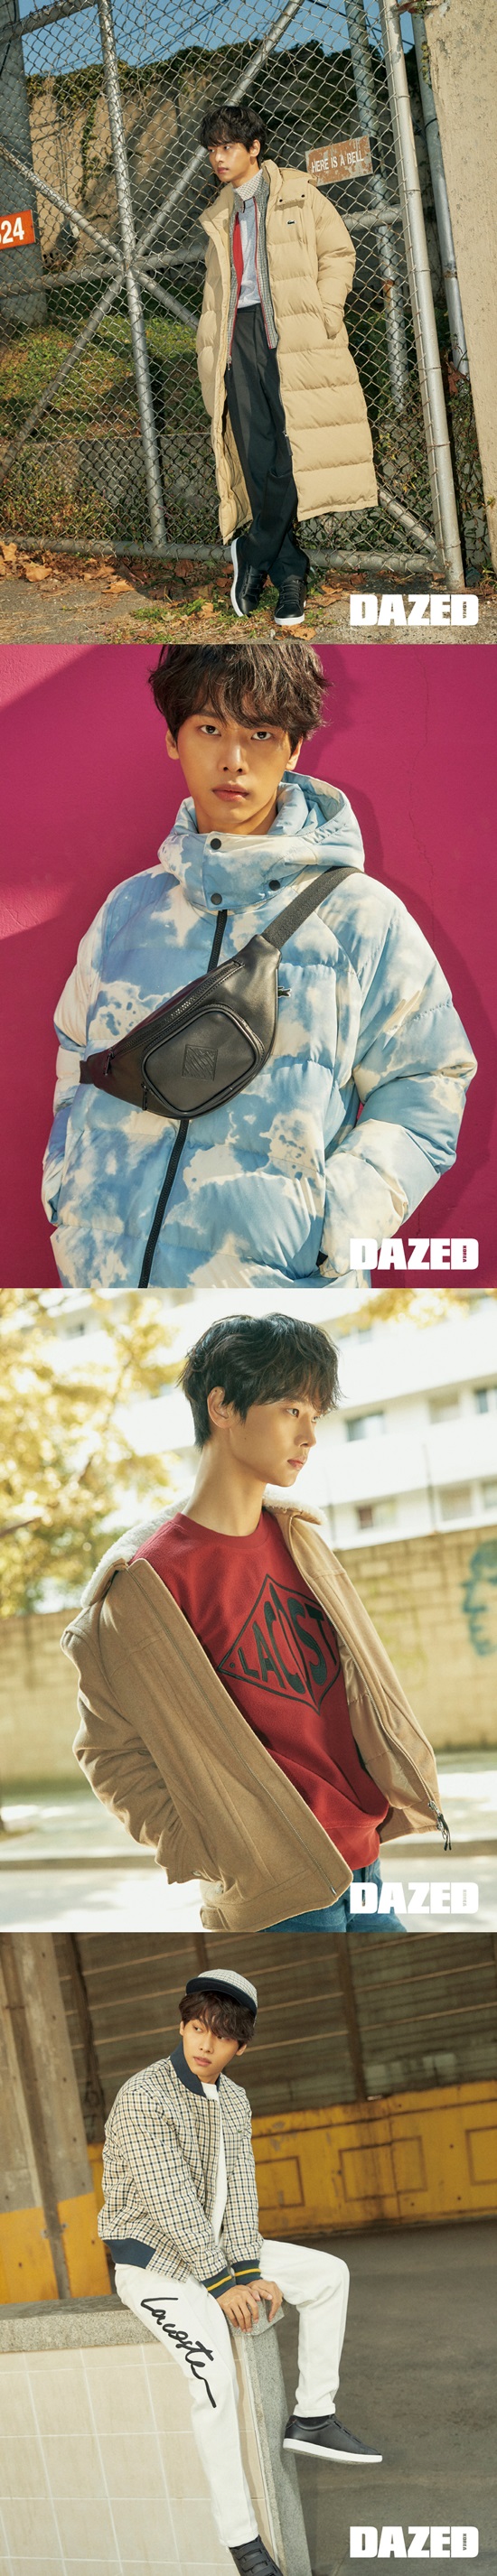 The male group VIXX N showed a free and imposing charm in casual style.Fashion magazine Days released a picture of N and Lacoste Love Live! in the November issue.N attracts attention by digesting the FW 18 winter item of Lacoste Love Live!, which contains retro sensibility in the 90s.In the picture, he made winter fashion using winter must-have outer item such as duffle coat, padding, casual jumper.N transformed into a stylish winter man with a warm carmel coloured hoodie duffel coat, black sweatshirt and scarf.He also layered a beige long down padding jacket, turtleneck sweater, and check bomber jacket to complete the mens down casual look.In addition, a variety of Lacoste Love Lives, including a check bomber jacket, a red color sweatshirt, and a padding jacket with a unique cloud pattern!In particular, N has raised the fashion index with body bags and hats, and predicted the next generation fashionista.The picture with N and Lacoste Love Live! will be released in the November issue of the Days. Lacoste Love Live!You can meet at stores and flagship stores.